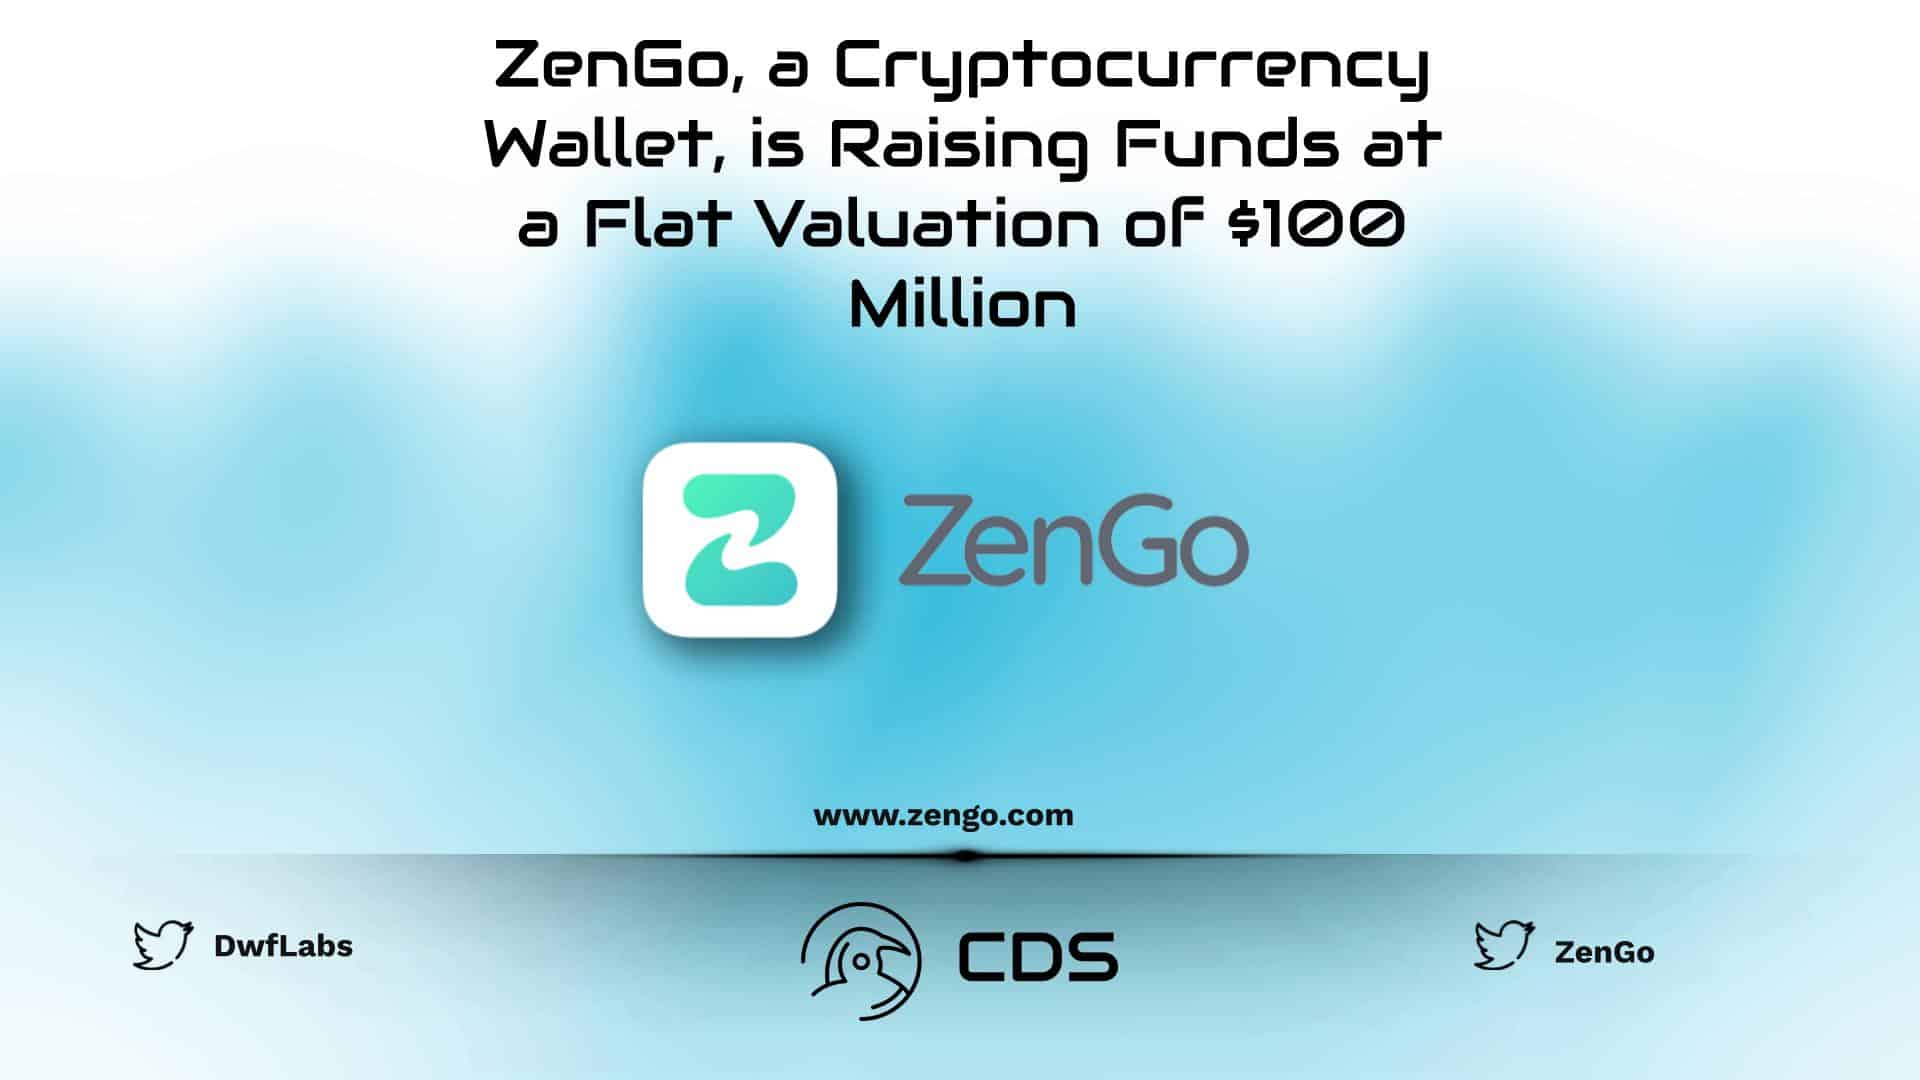 ZenGo, a Cryptocurrency Wallet, is Raising Funds at a Flat Valuation of $100 Million